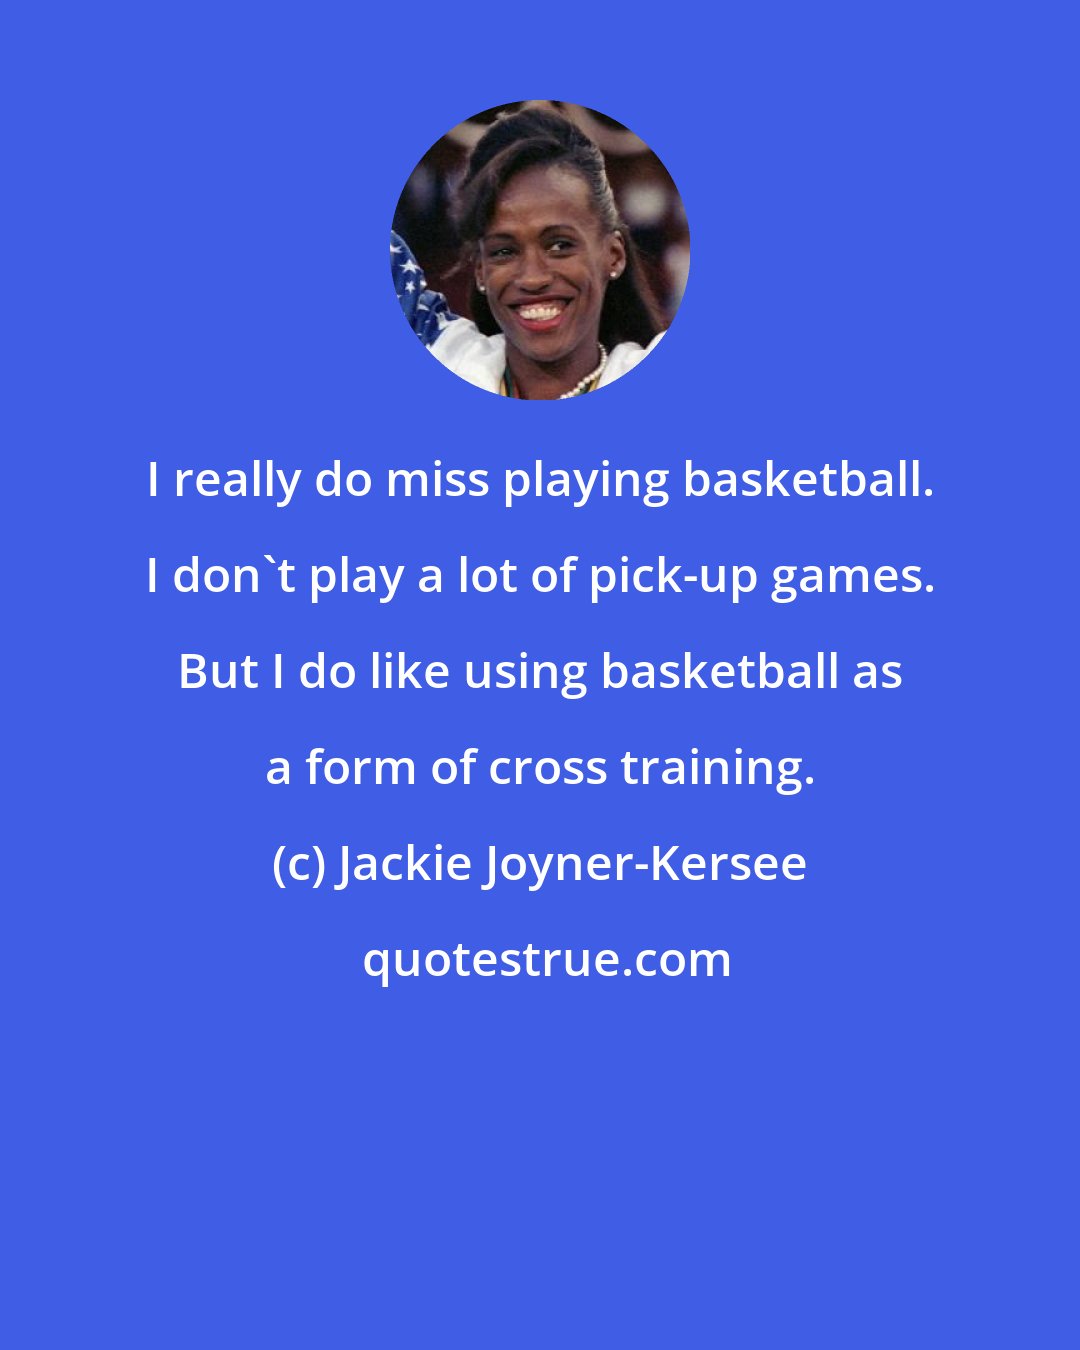 Jackie Joyner-Kersee: I really do miss playing basketball. I don't play a lot of pick-up games. But I do like using basketball as a form of cross training.